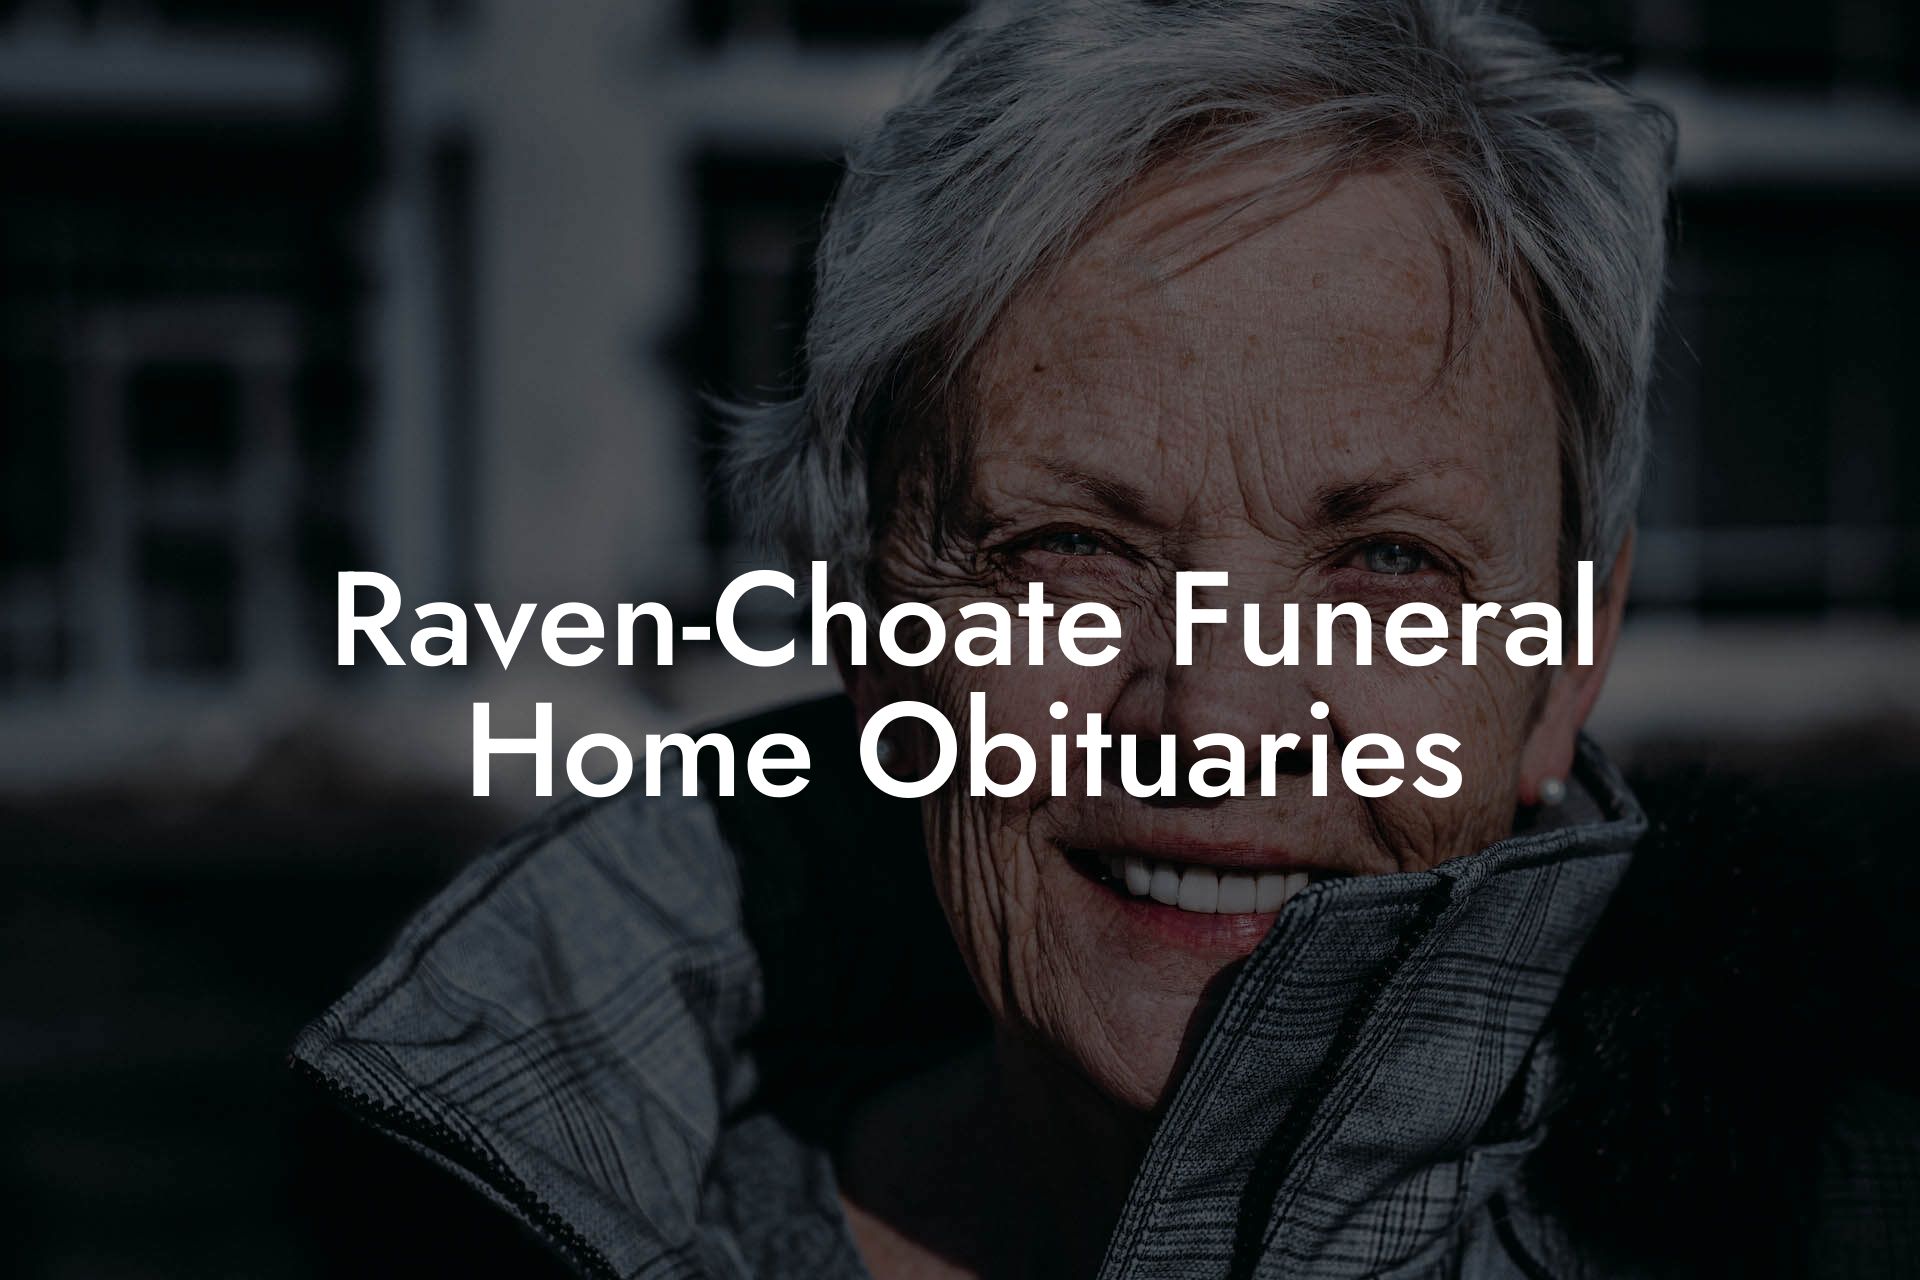 Raven-Choate Funeral Home Obituaries